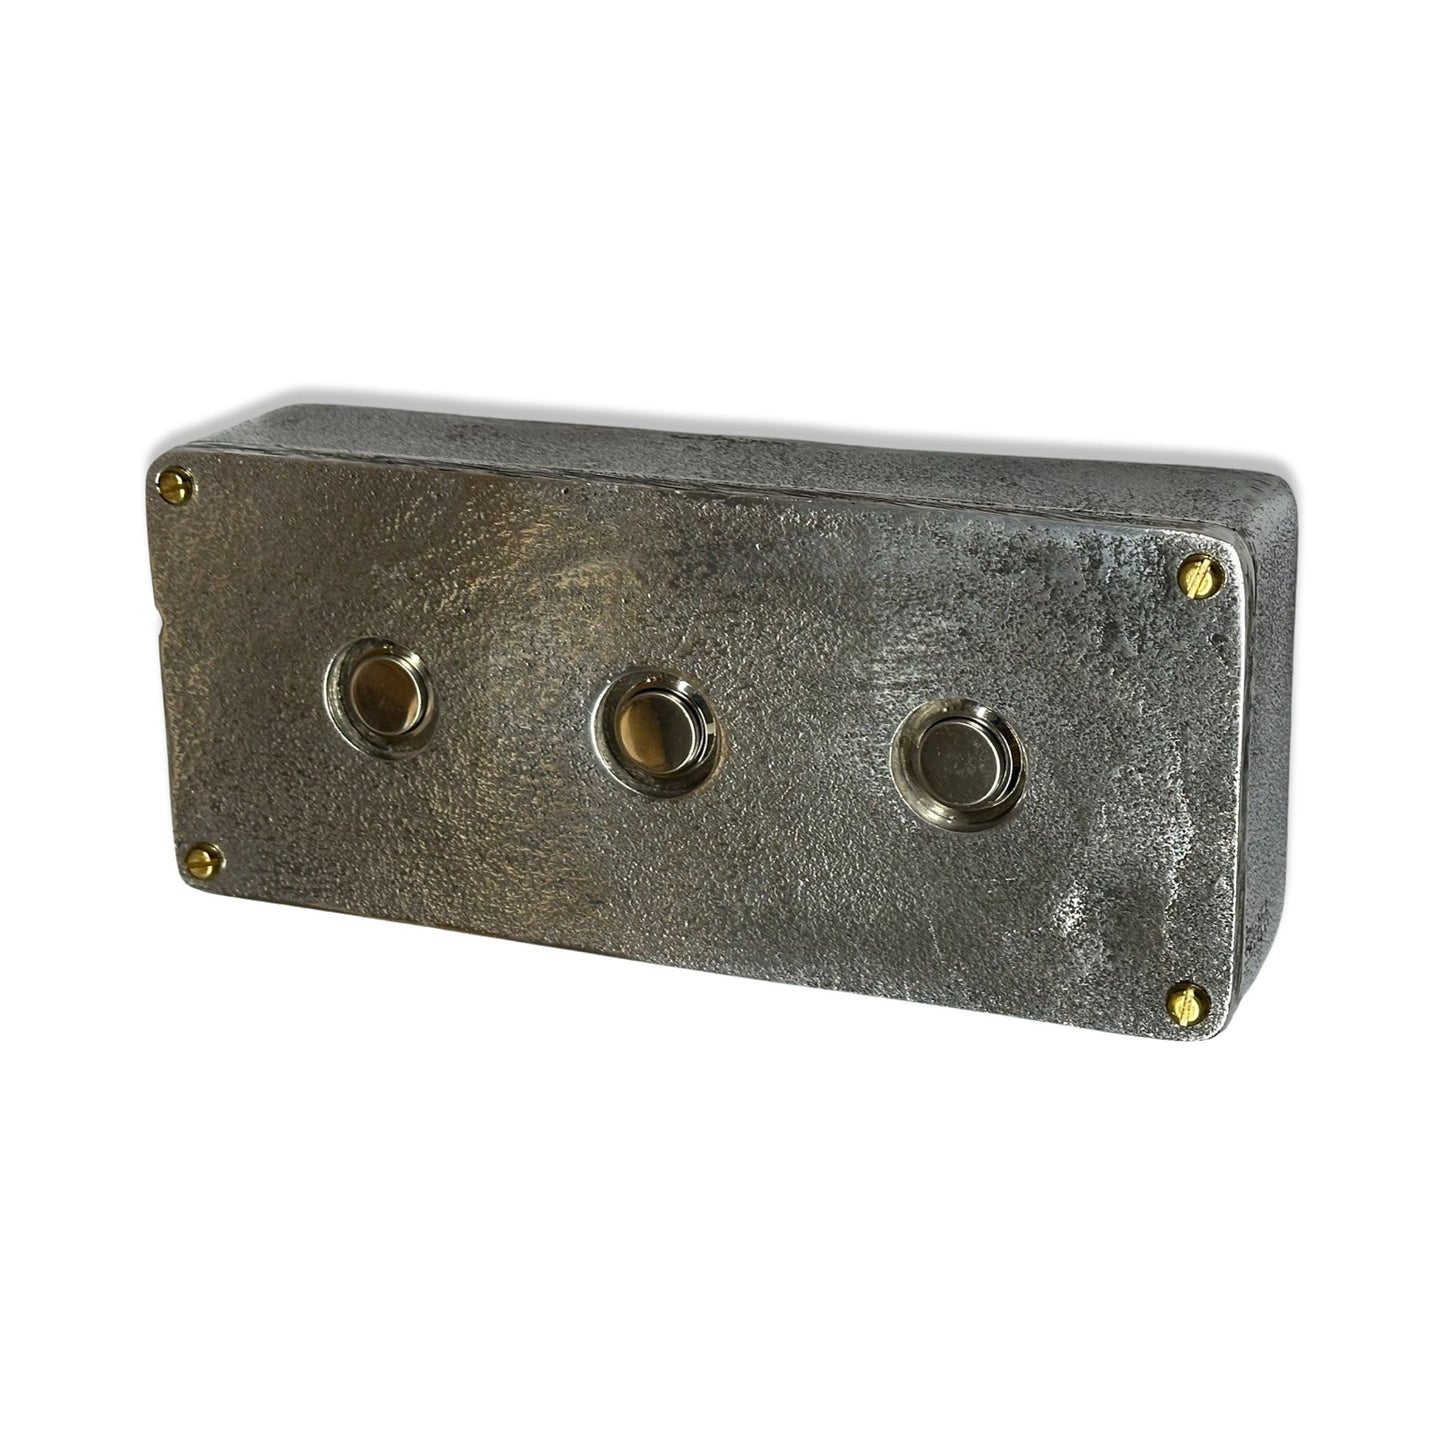 Momentary 3 Gang Solid Cast Metal Conduit Light Switch Industrial - BS EN Approved Vintage Crabtree 1950’s Style